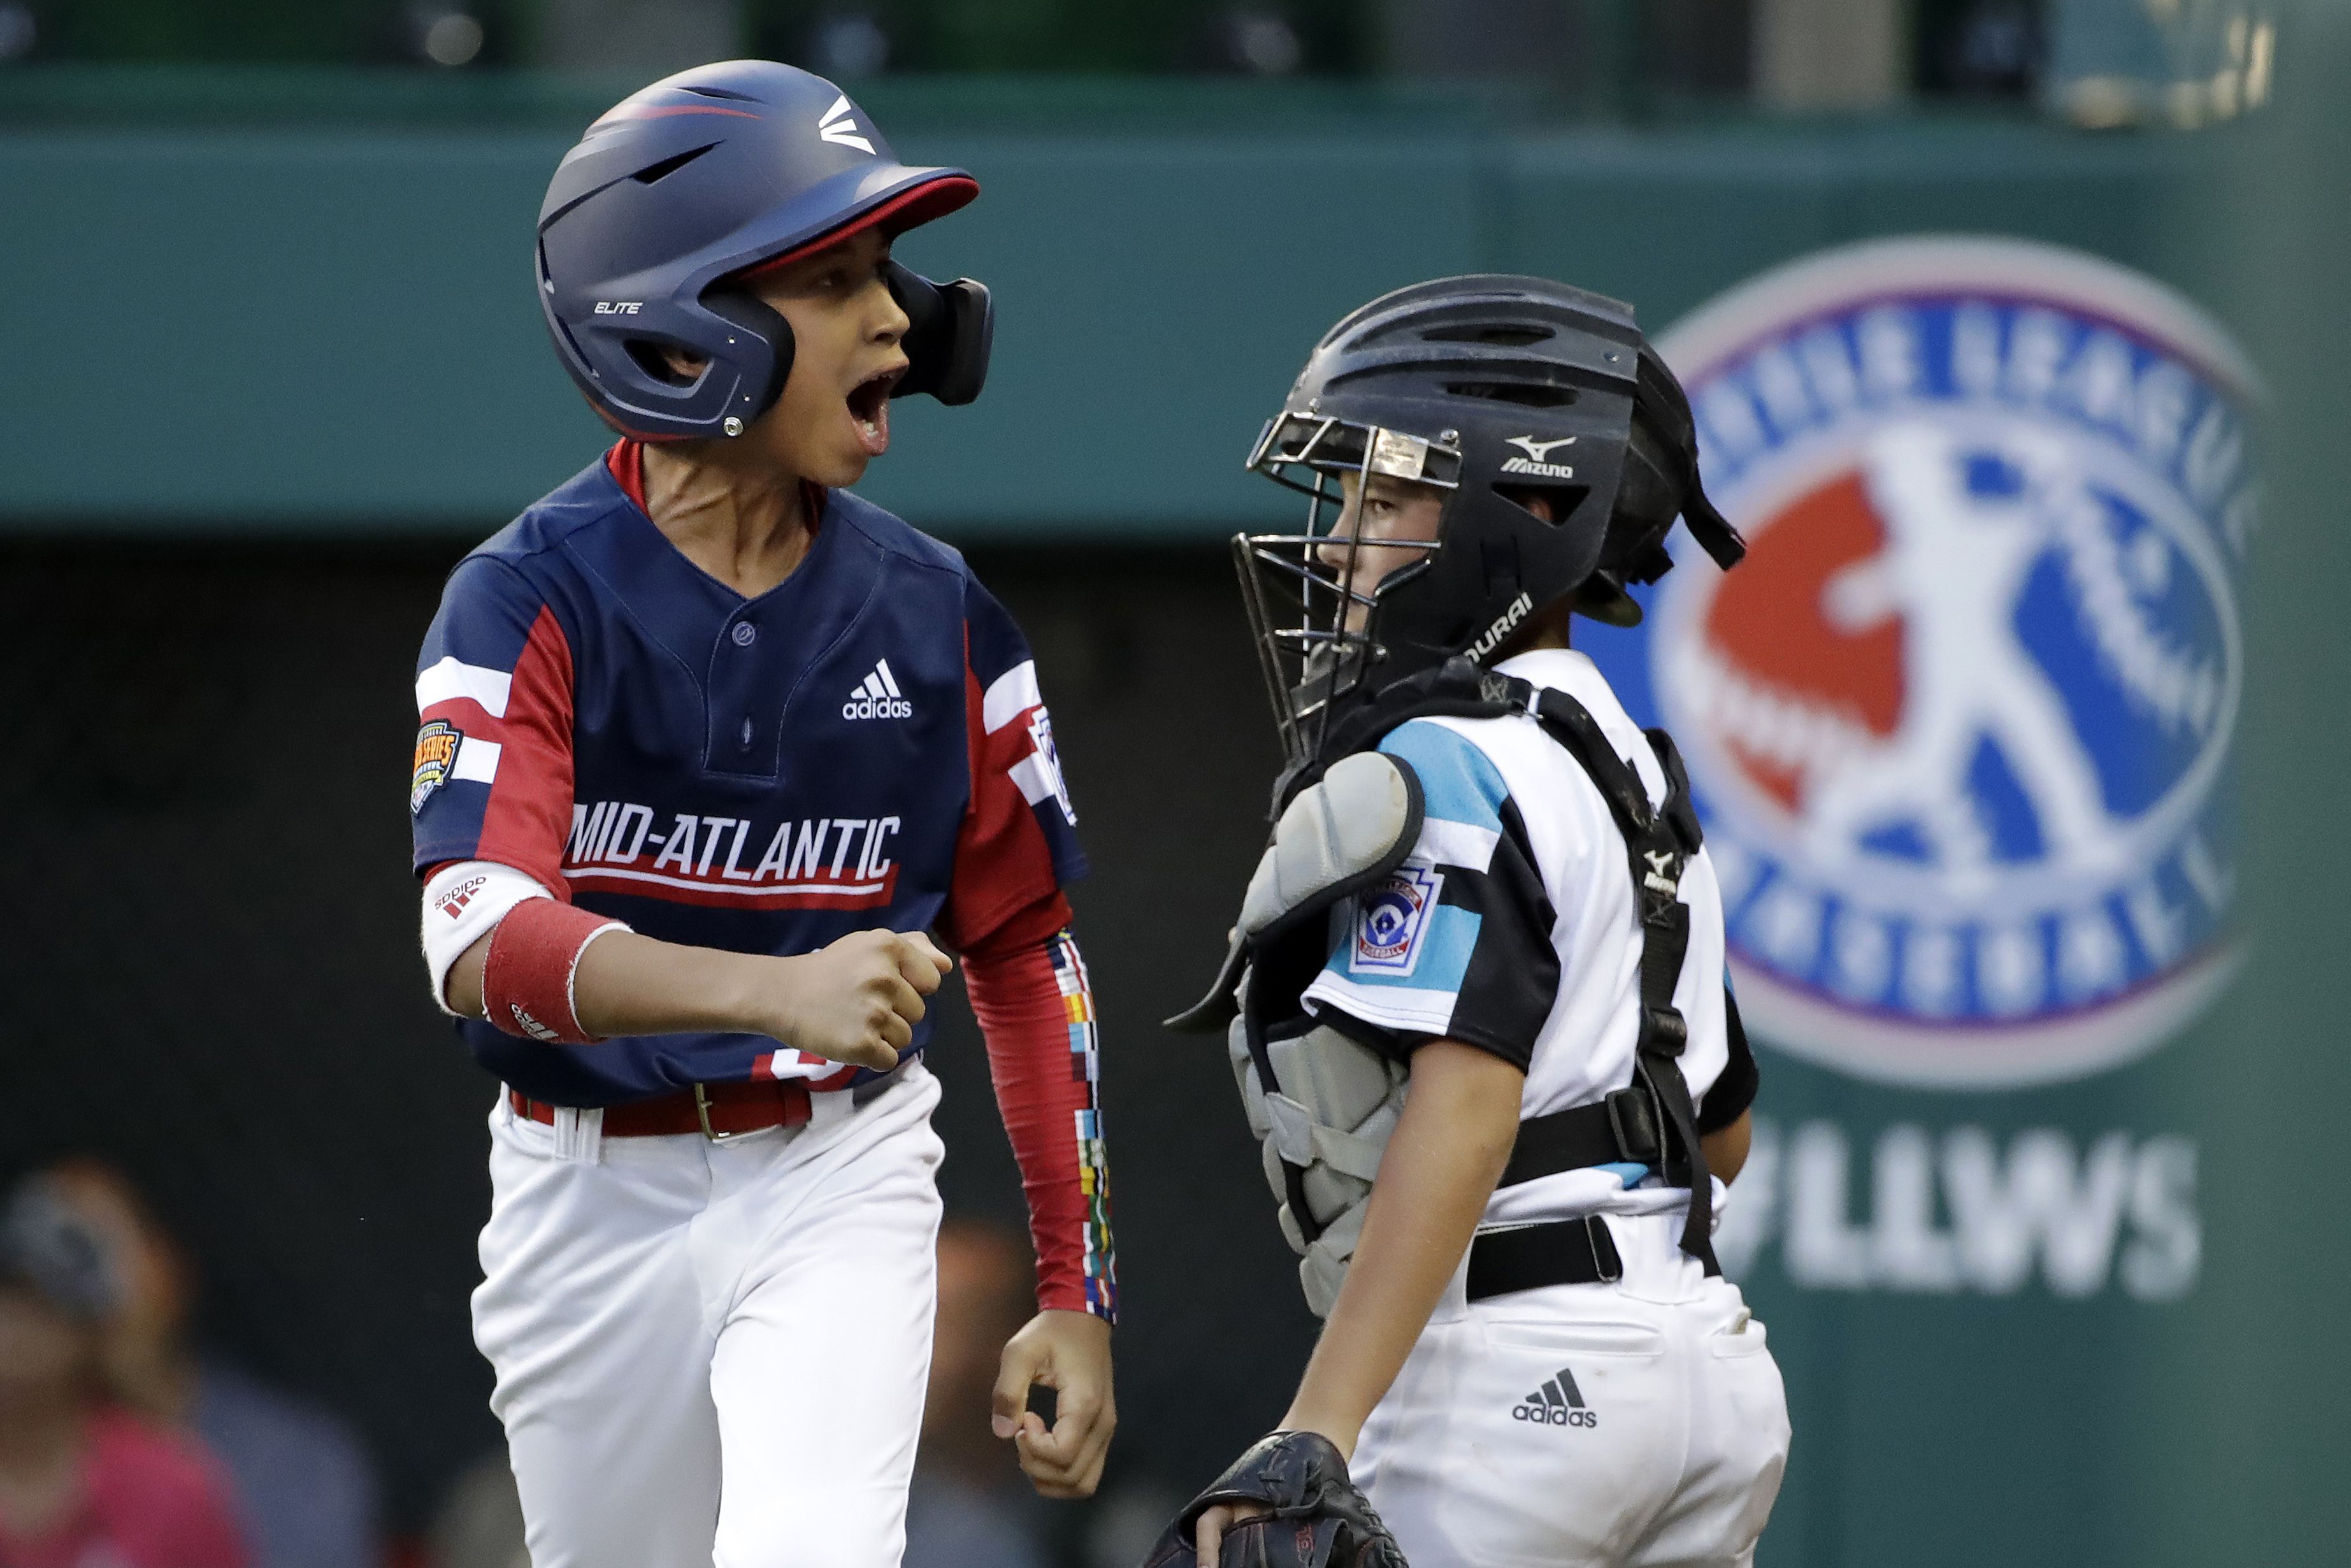 New Jersey team eliminated from Little League World Series with 4